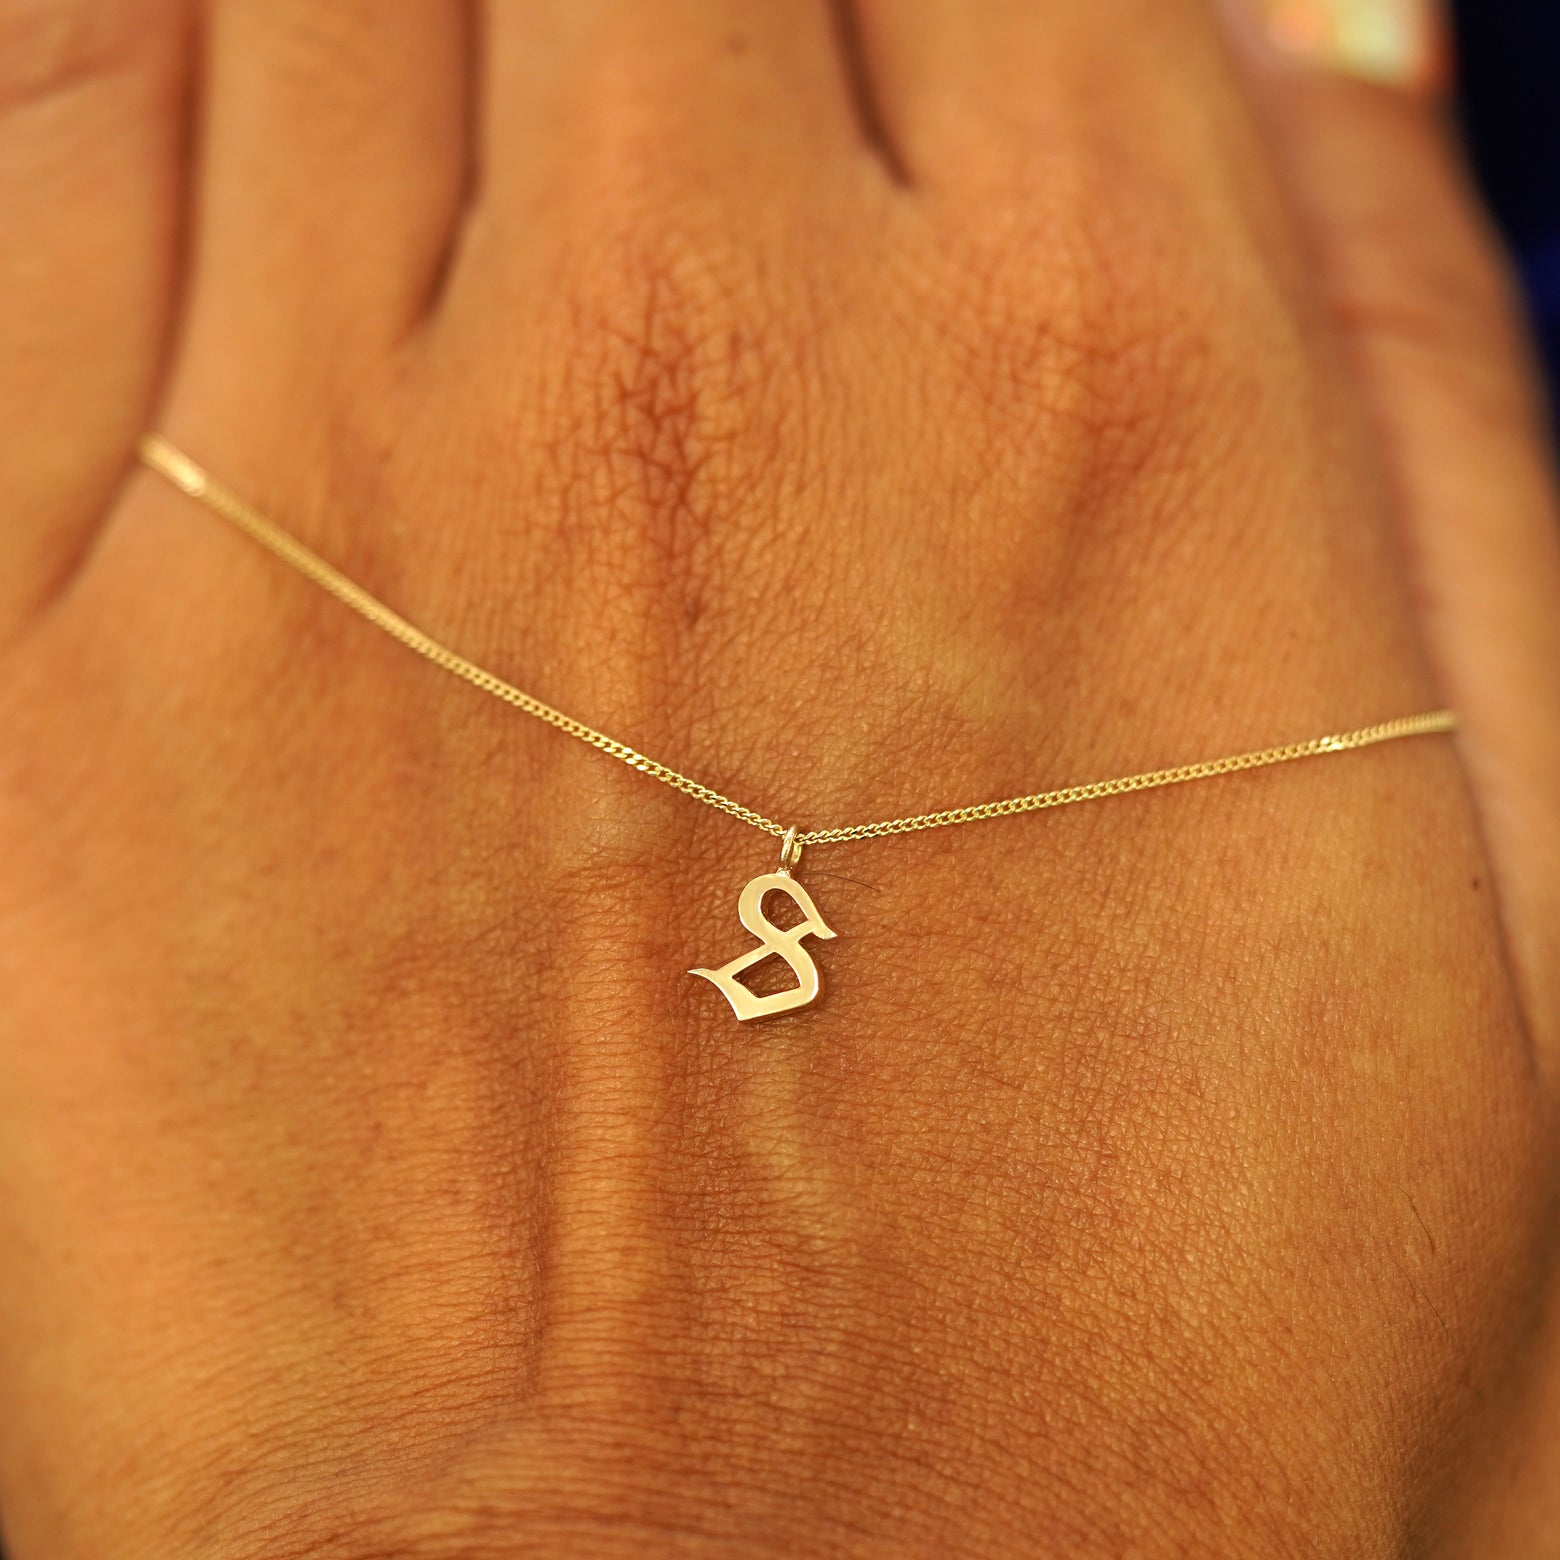 A solid 14k gold Initial Charm Necklace with the letter S draped across the back of a model's hand